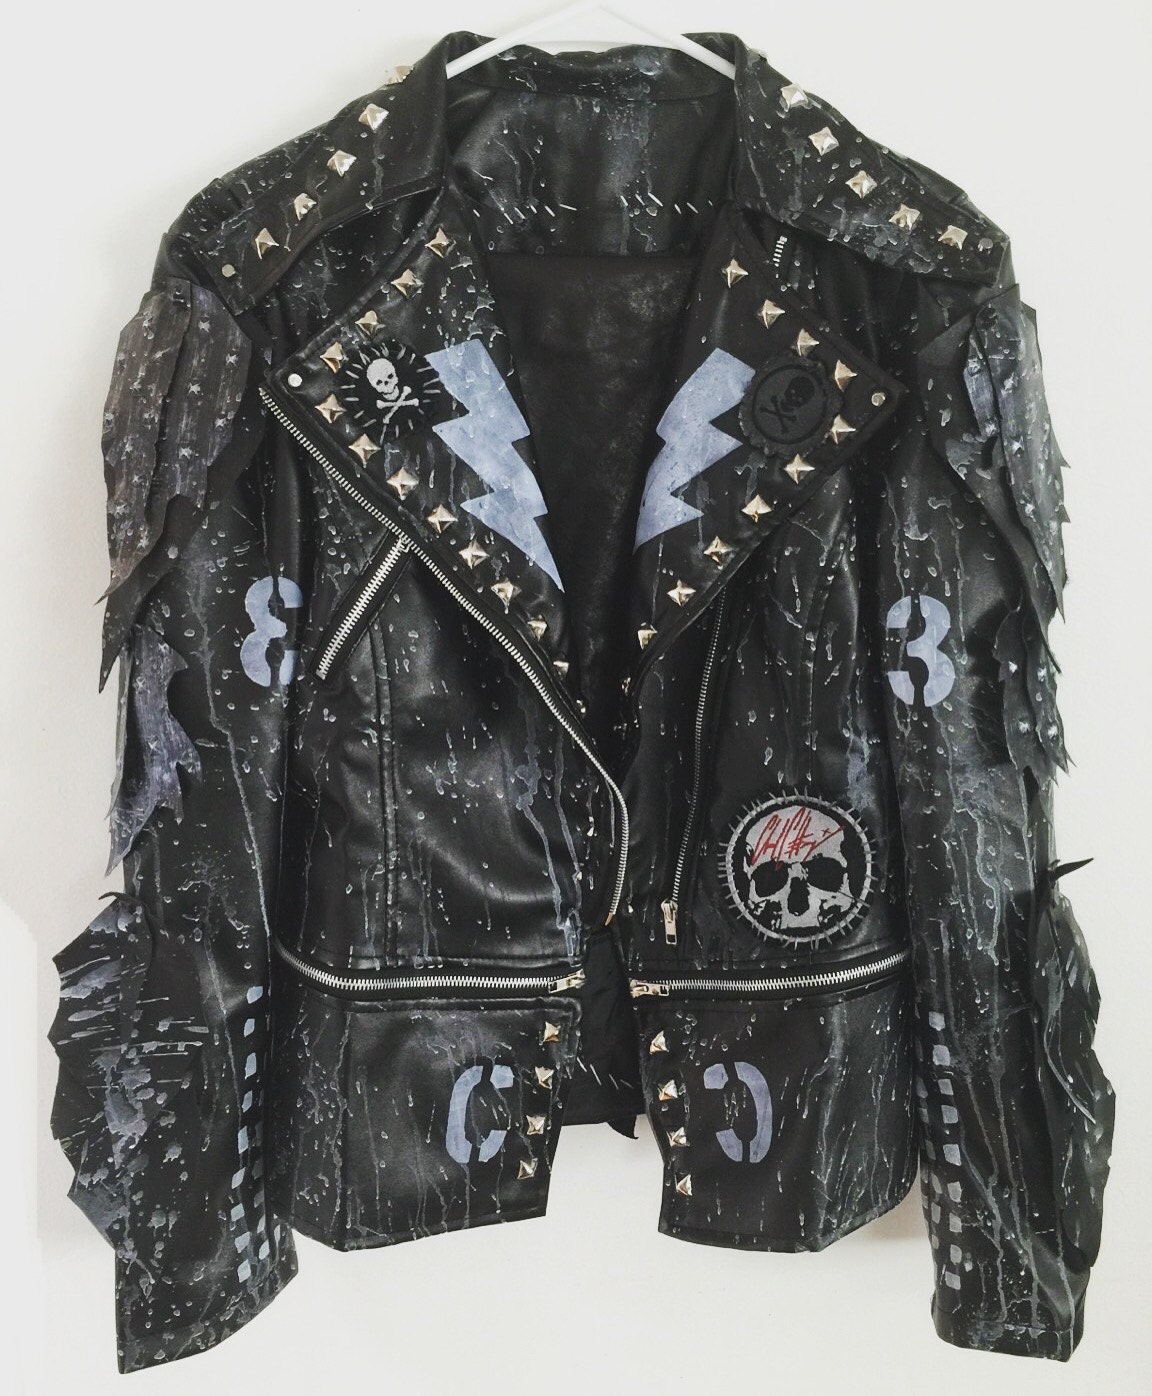 Iron Maiden jacket by Chad Cherry